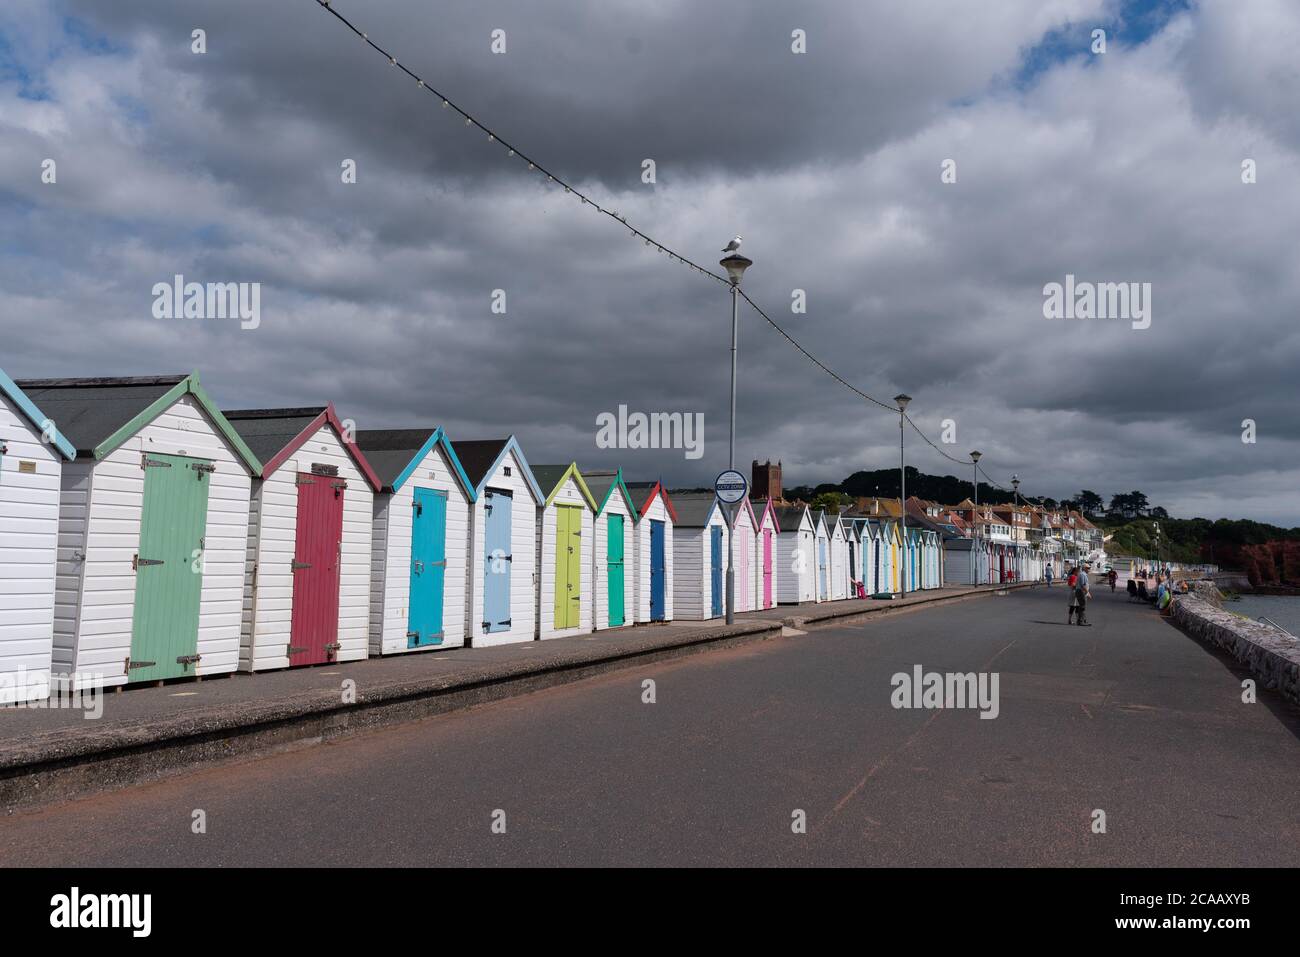 People sitting by Beach huts at Paignton enjoying the sun between the clouds on a typical British summer weather Stock Photo